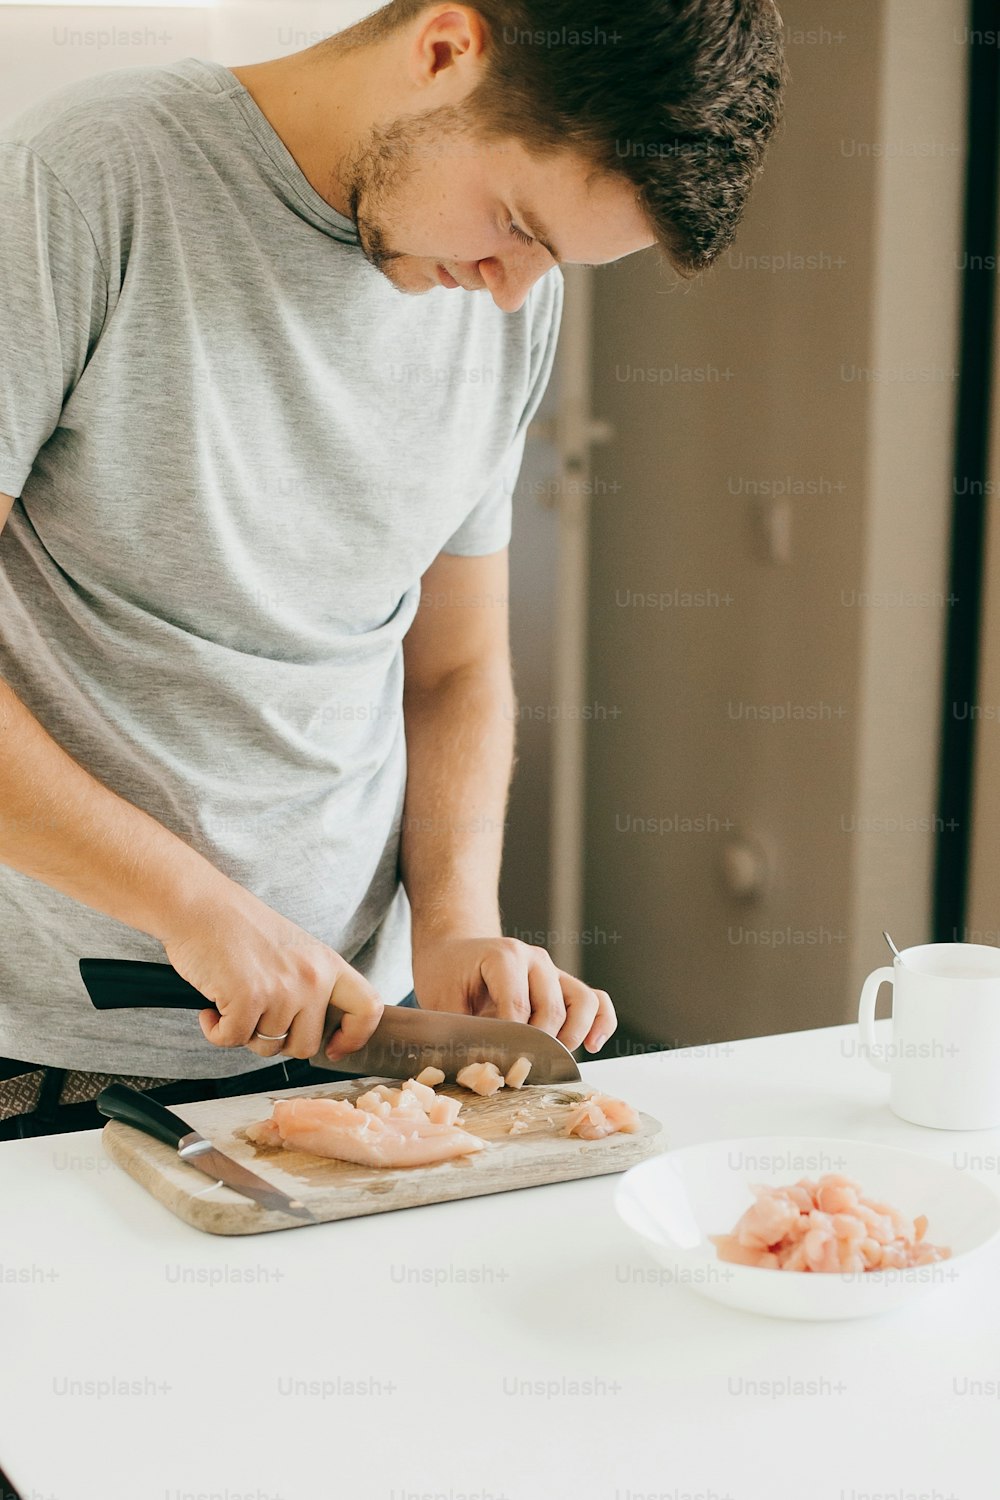 Young man cutting chicken fillet with knife on wooden board in modern white kitchen. Process of cooking and preparing meat, hands close up. Home cooking concept